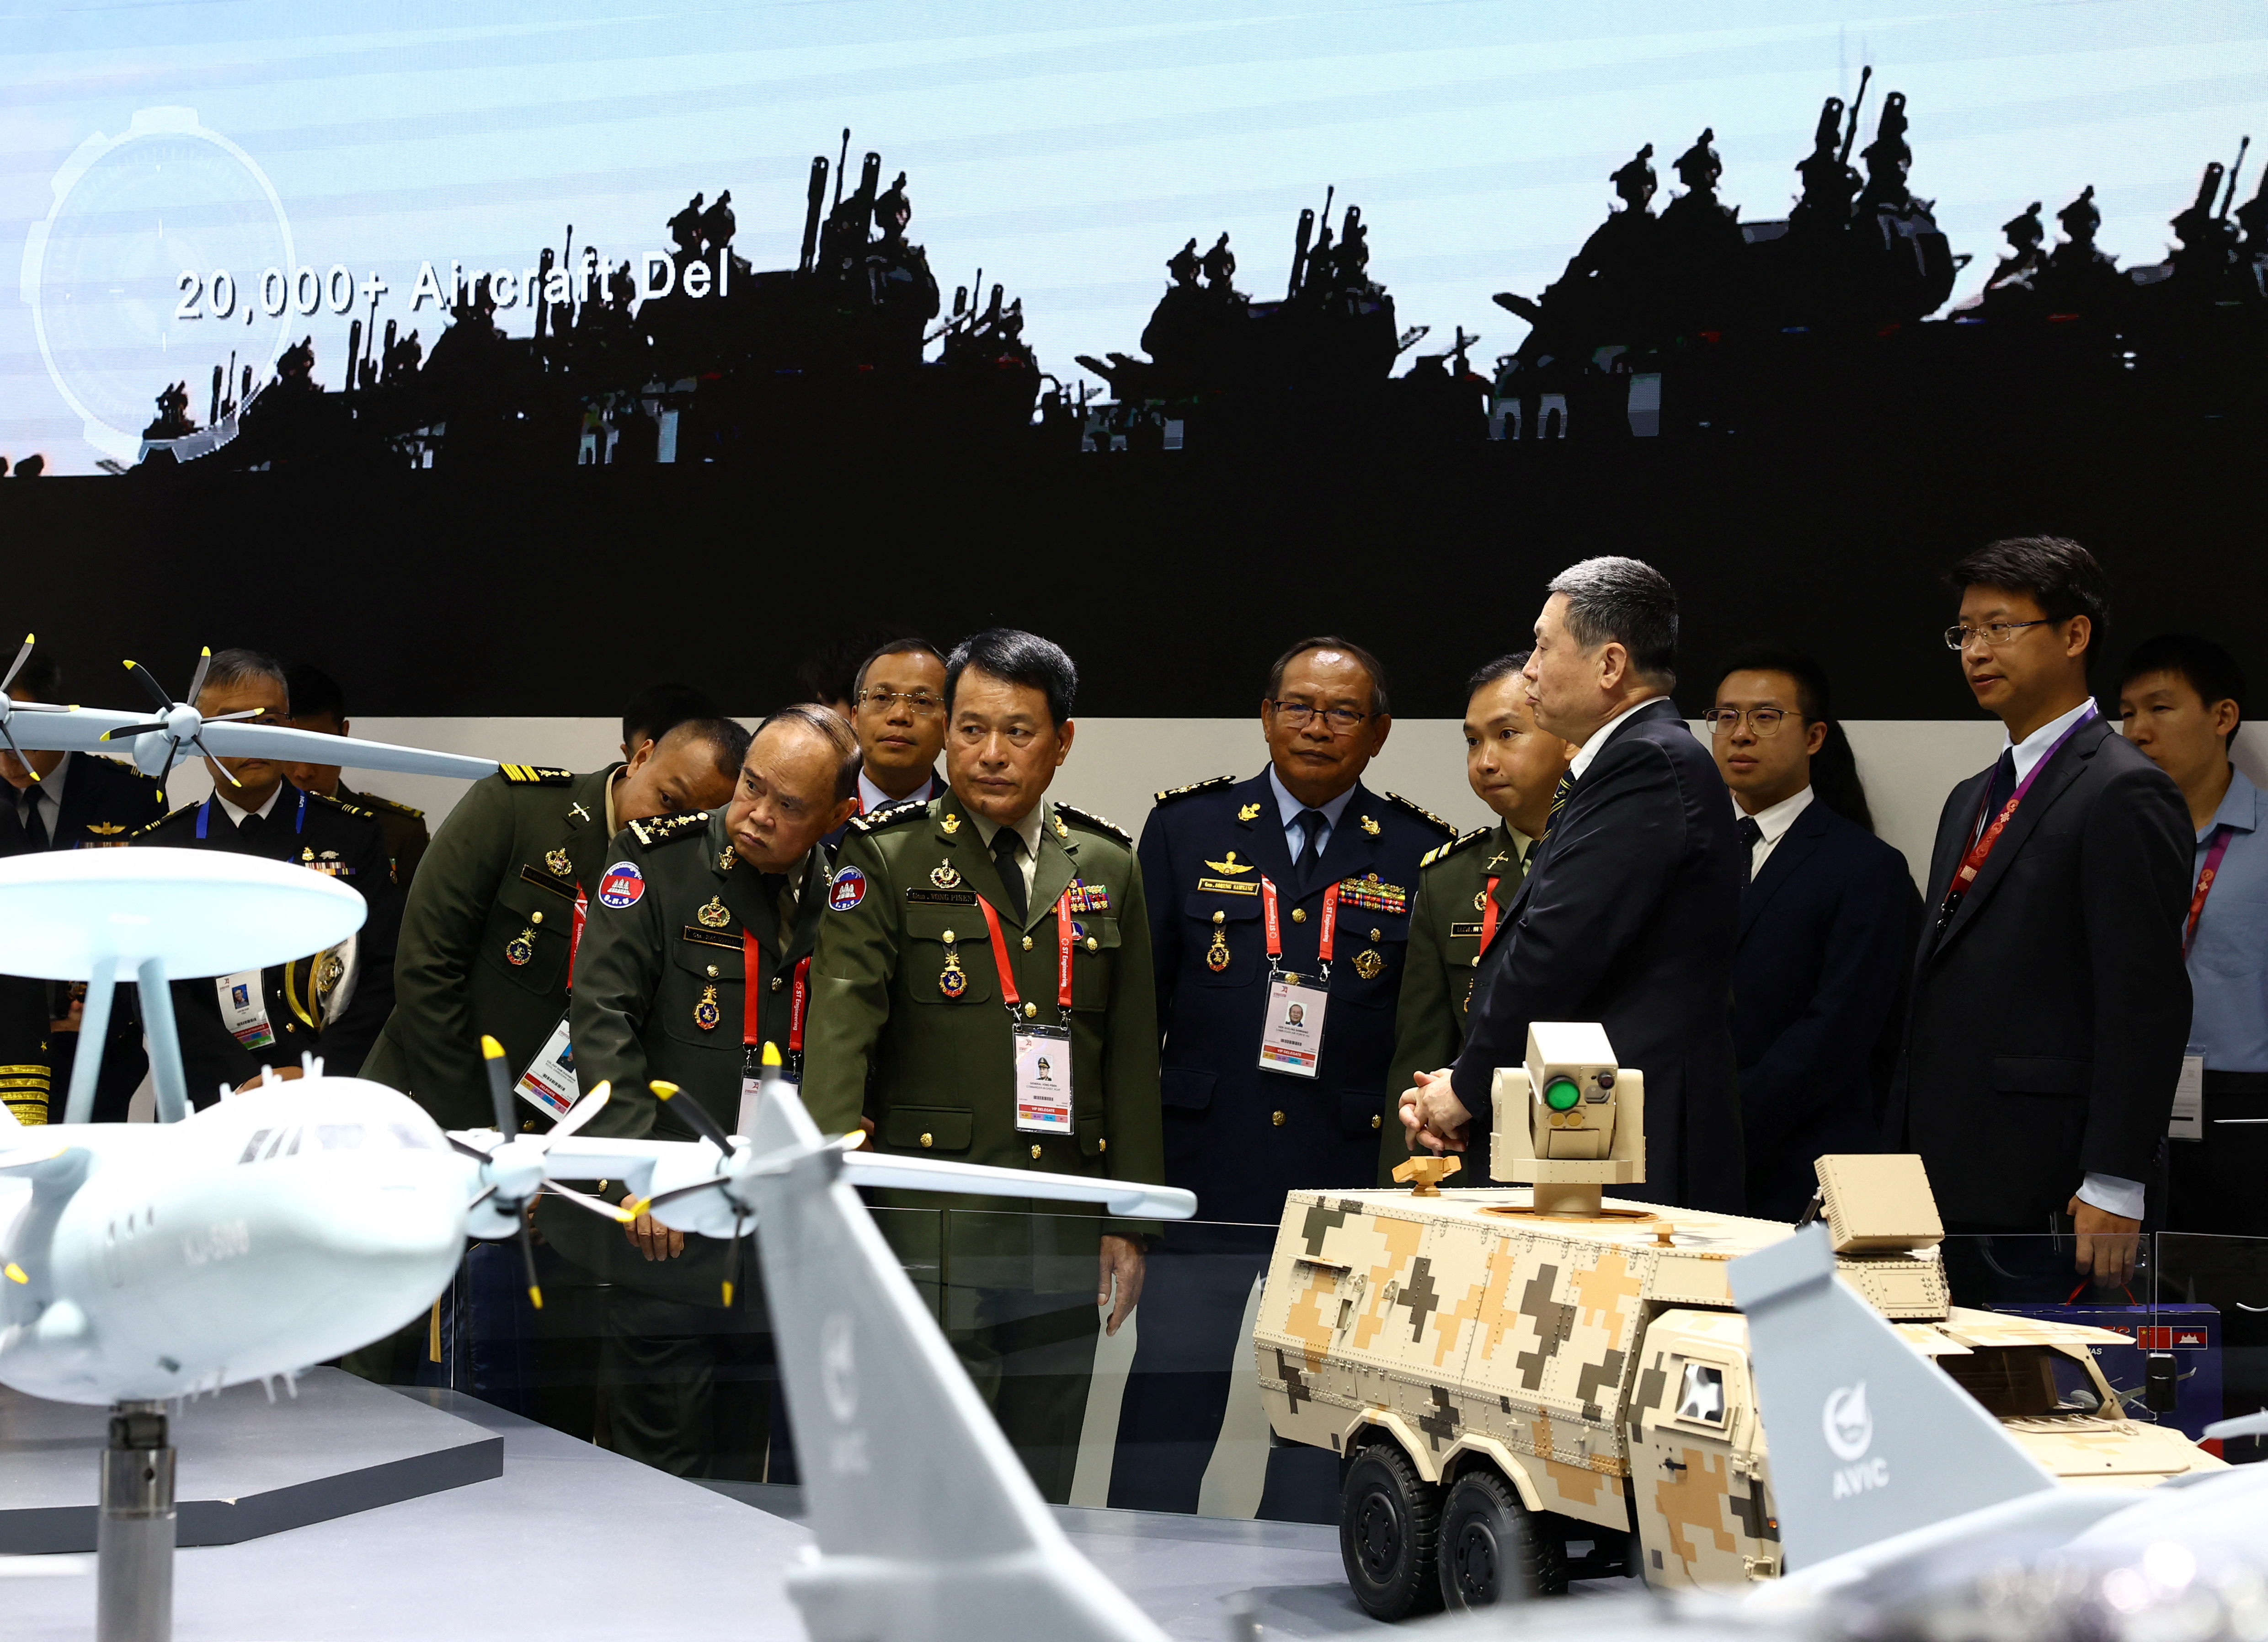 Cambodia's Armed Forces Commander-in-chief Vong Pisen tours the Aviation Industry Corporation of China (AVIC) booth during the Singapore Airshow at Changi Exhibition Centre in Singapore